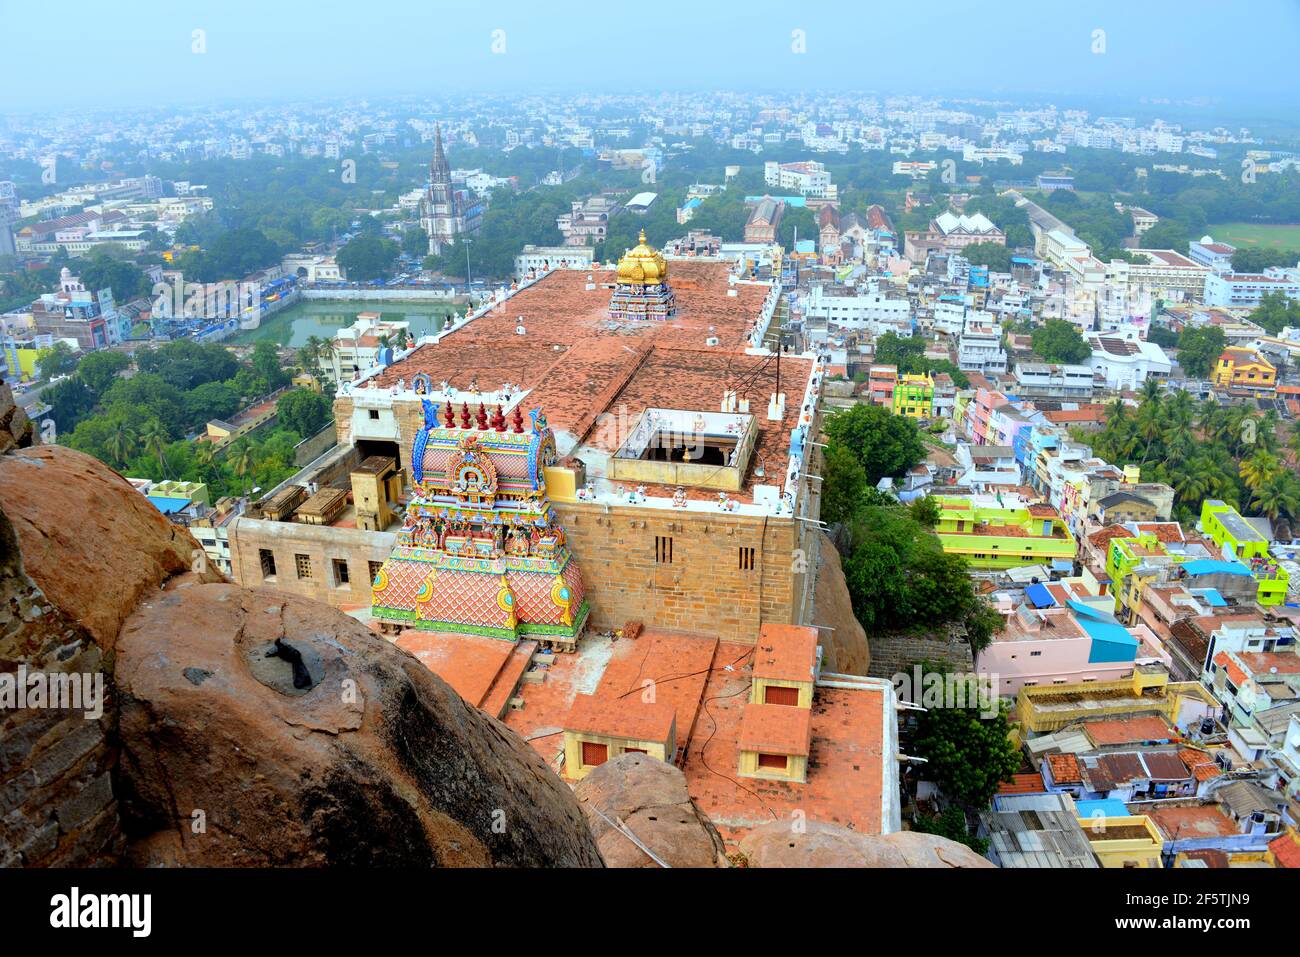 The Thayumanashwamy Temple is a temple situated in the Rockfort complex in the city of Tiruchirappalli, India Stock Photo